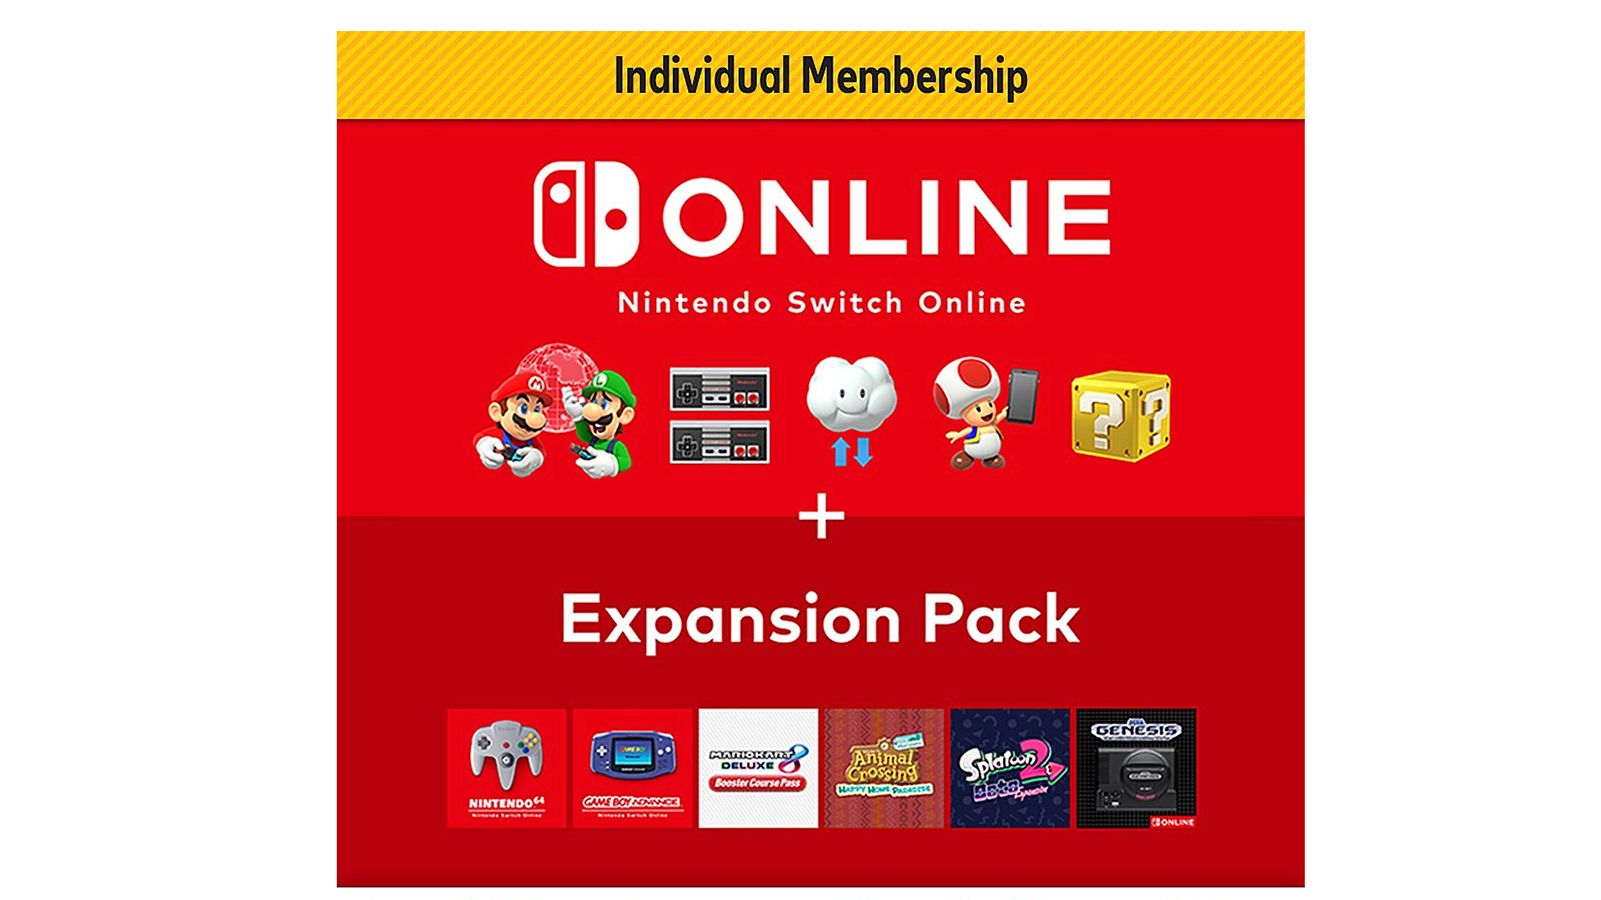 Nintendo Switch Online + Expansion Pack